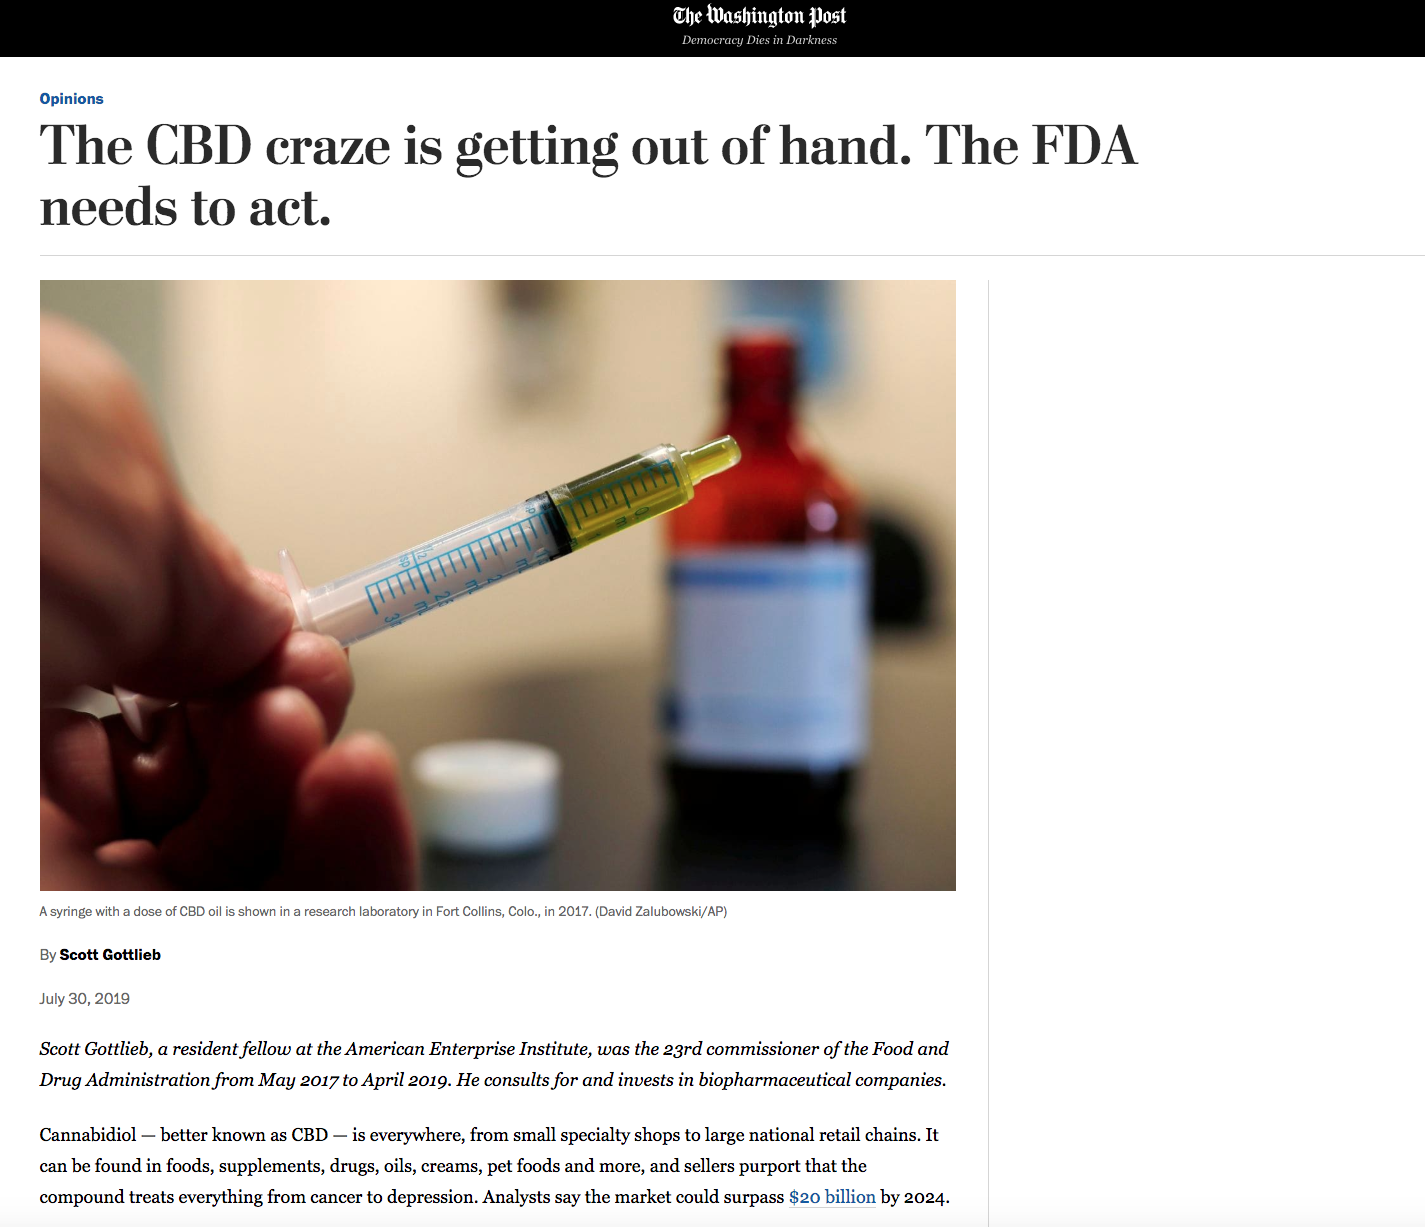 The CBD craze is getting out of hand. The FDA needs to act.